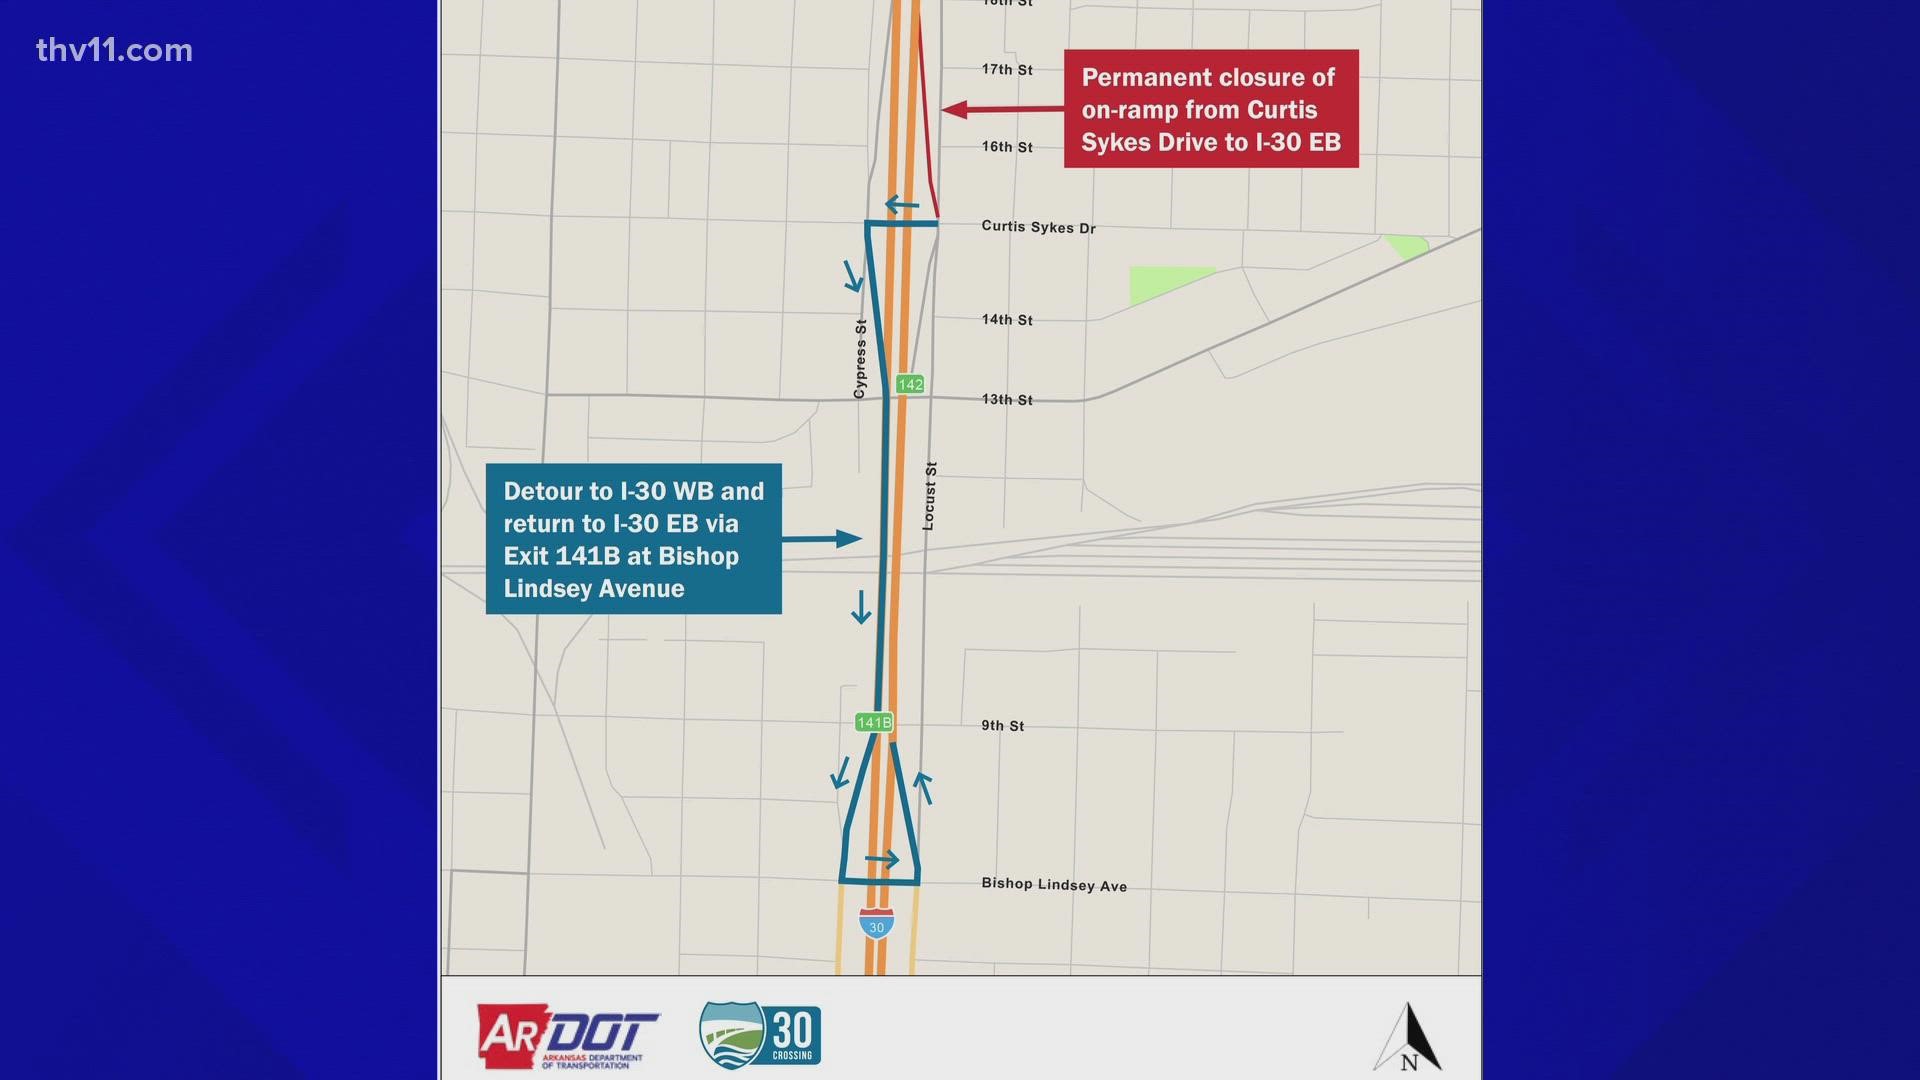 ARDOT shared that they'll be permanently closing the eastbound on-ramp at Curtis Sykes Drive in North Little Rock during the evening of June 27.